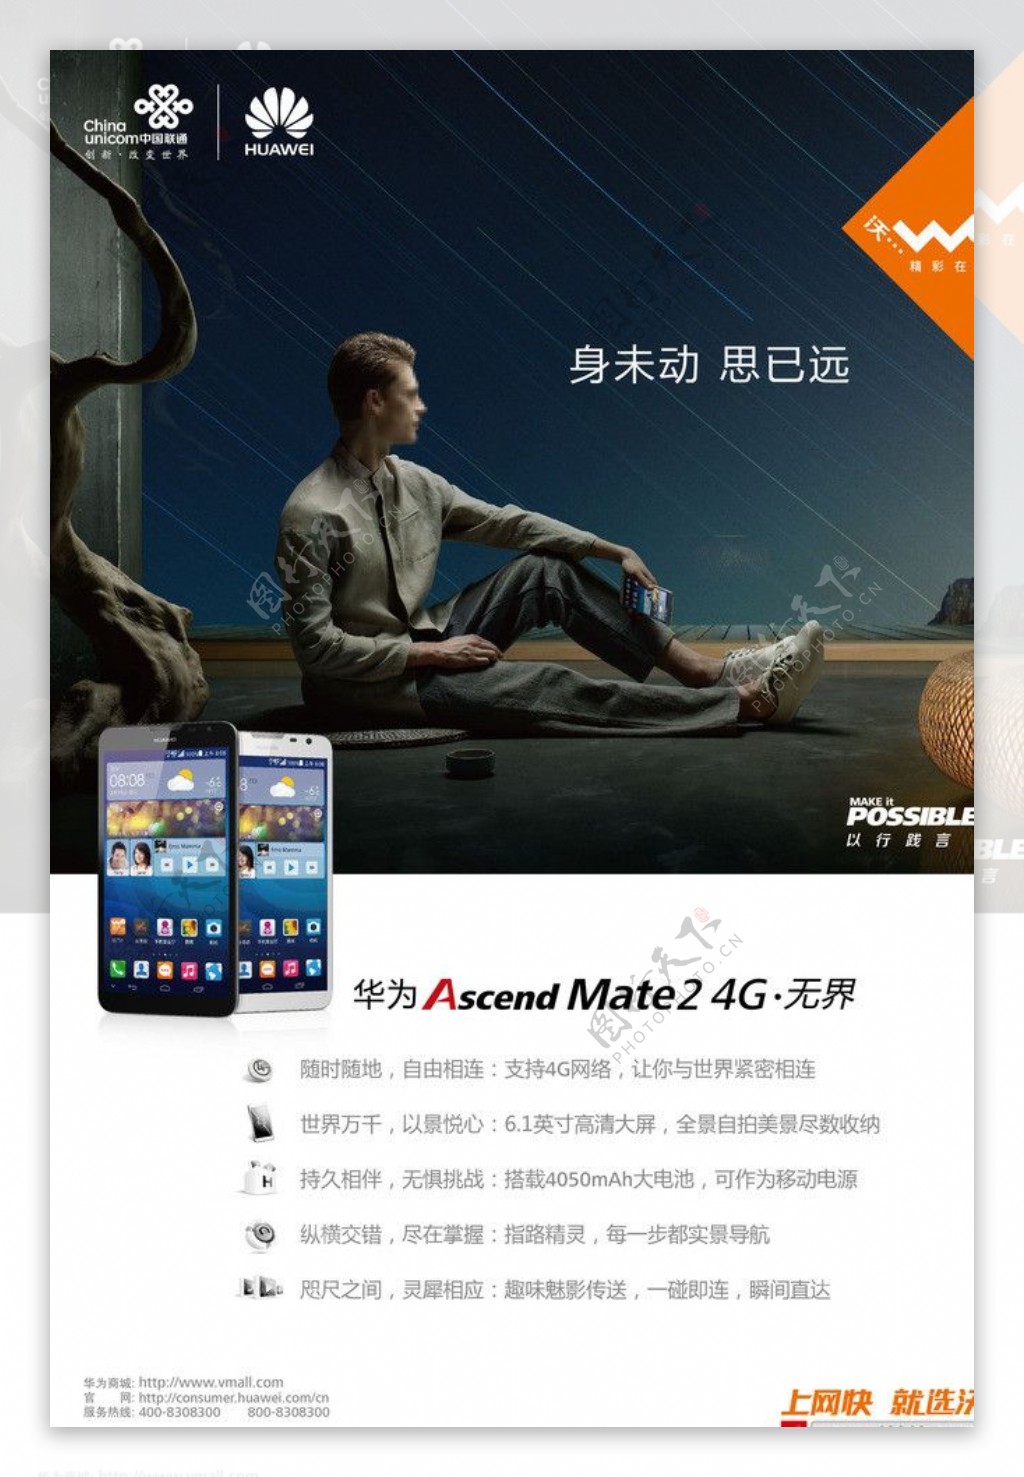 Huawei Ascend Mate2 4G - Full Specifications - MobileDevices.com.pk